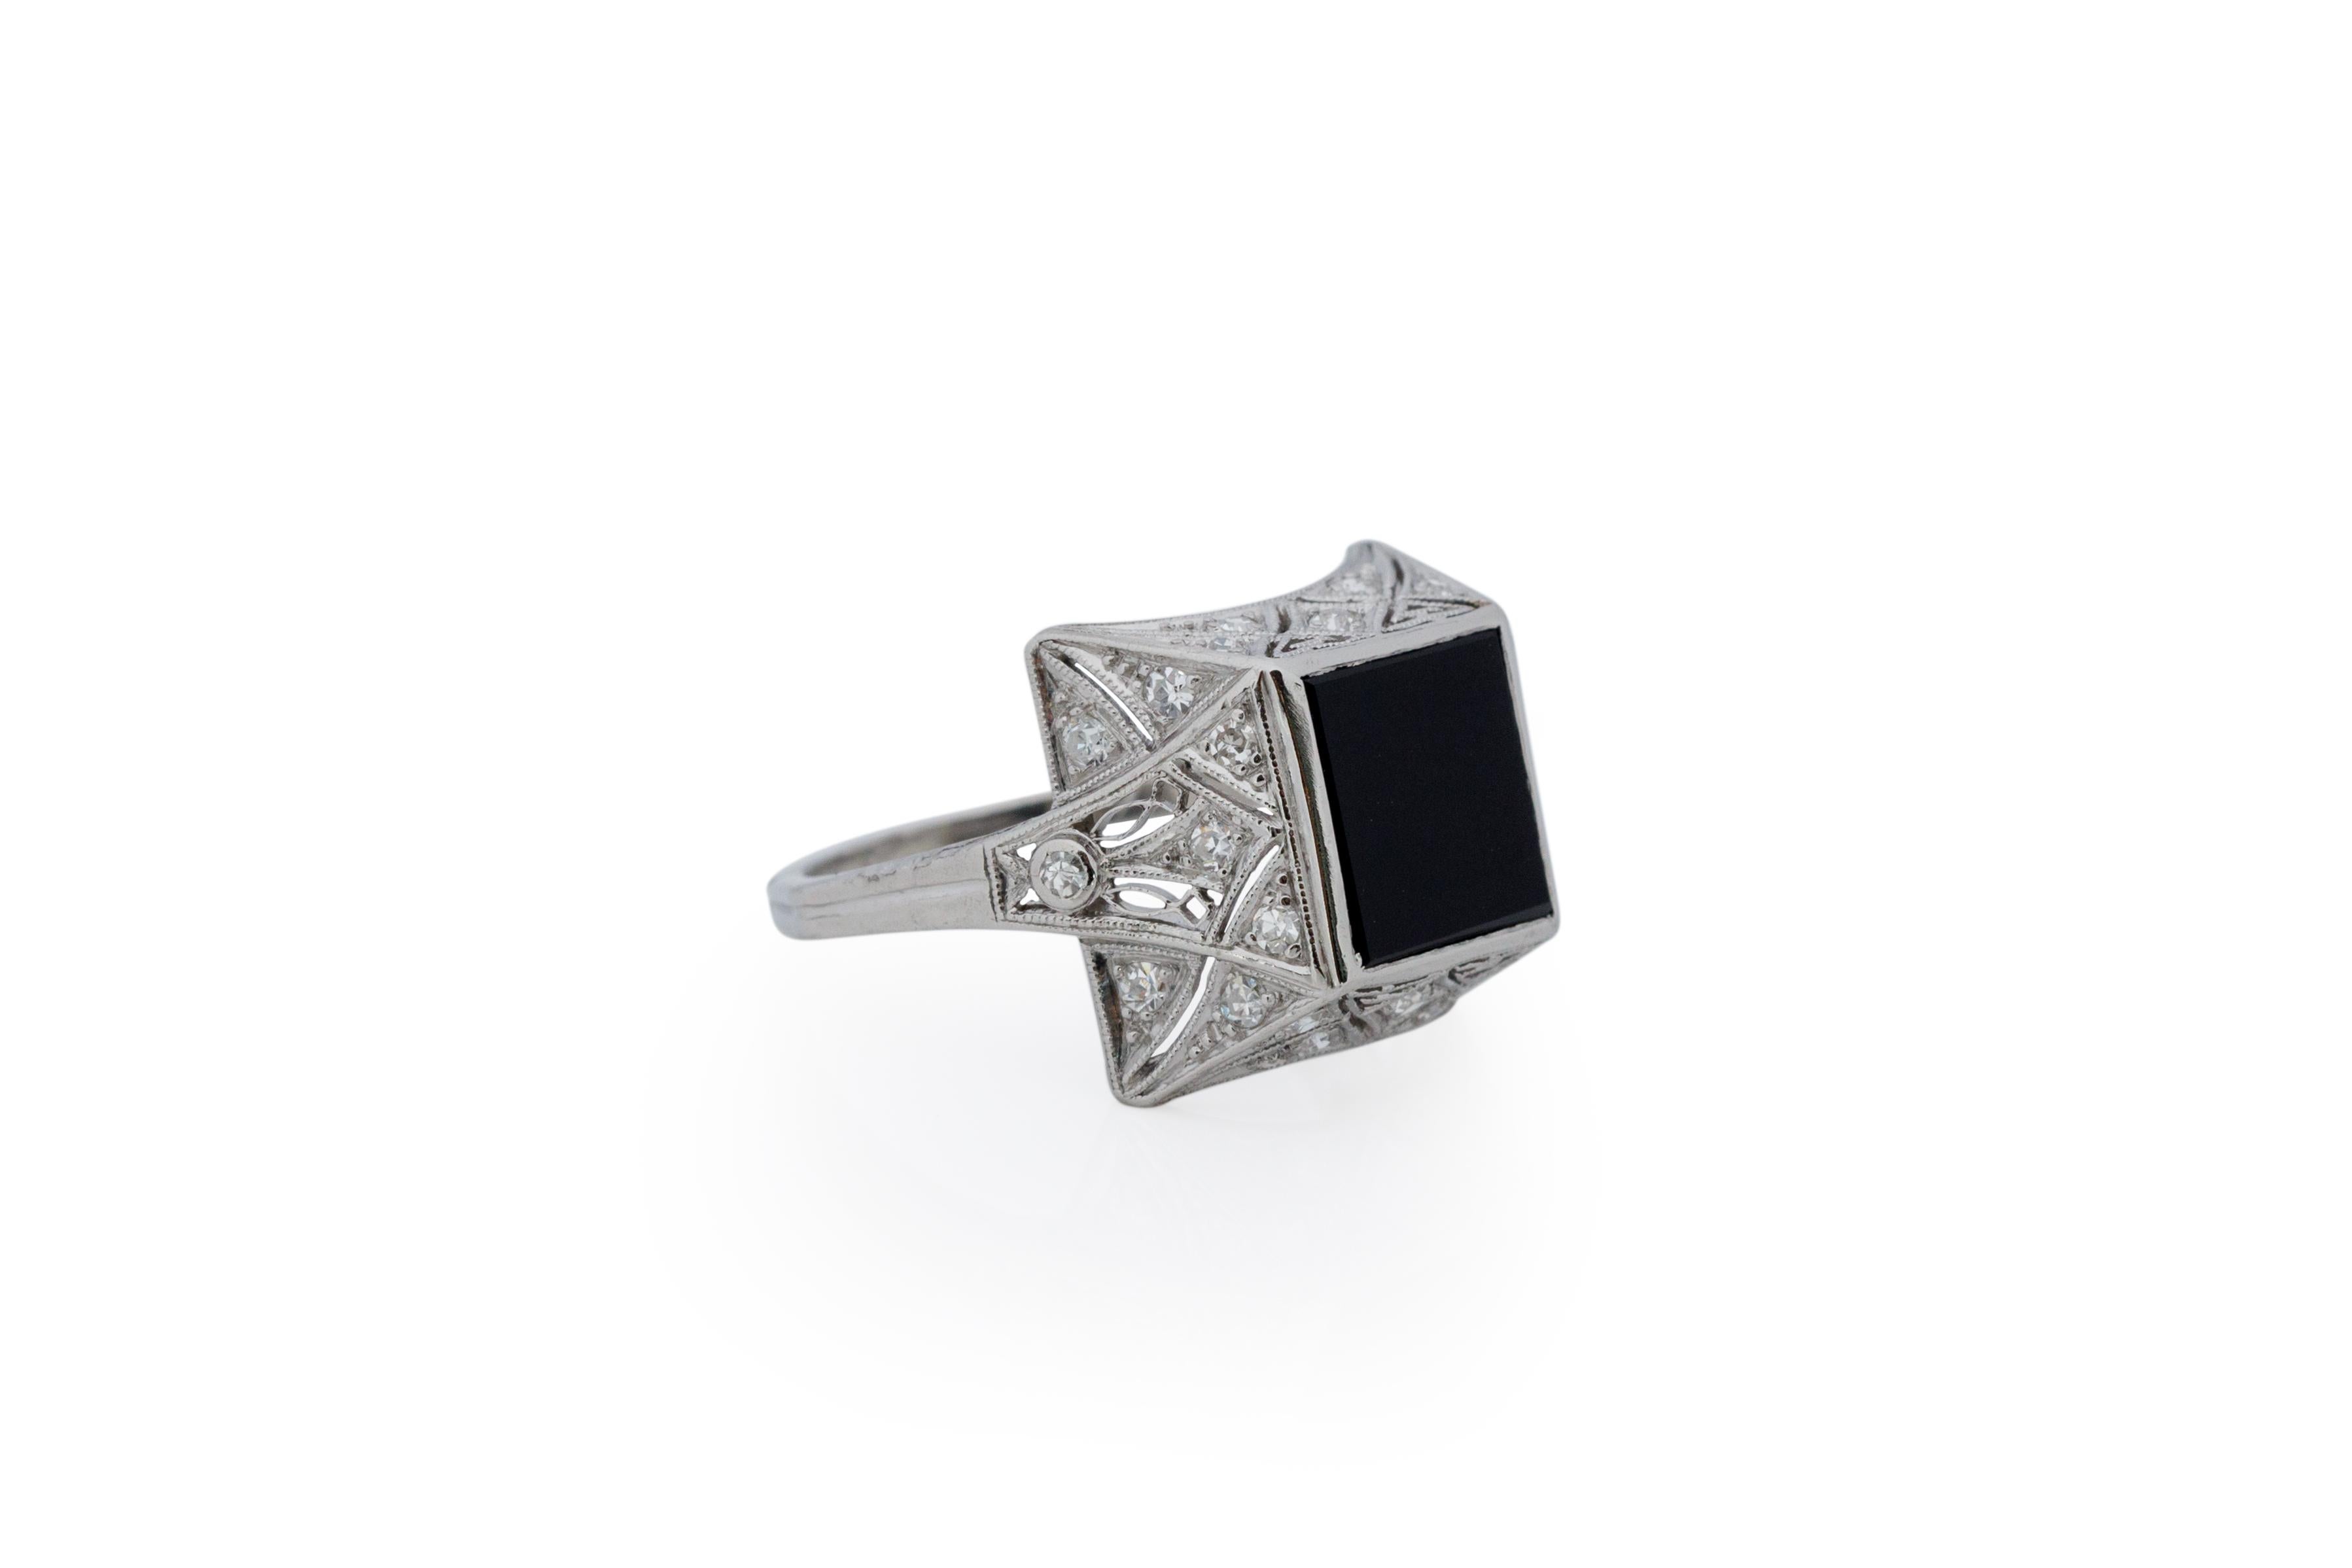 Ring Size: 7.5
Metal Type: Platinum [Hallmarked, and Tested]
Weight: 6.5 grams

Diamond Details:
Weight: .40 carat total weight
Cut: Old European brilliant
Color: F-G
Clarity: VS

Onyx Details:
Weight: 1.50 carat total weight
Cut: Antique Beveled